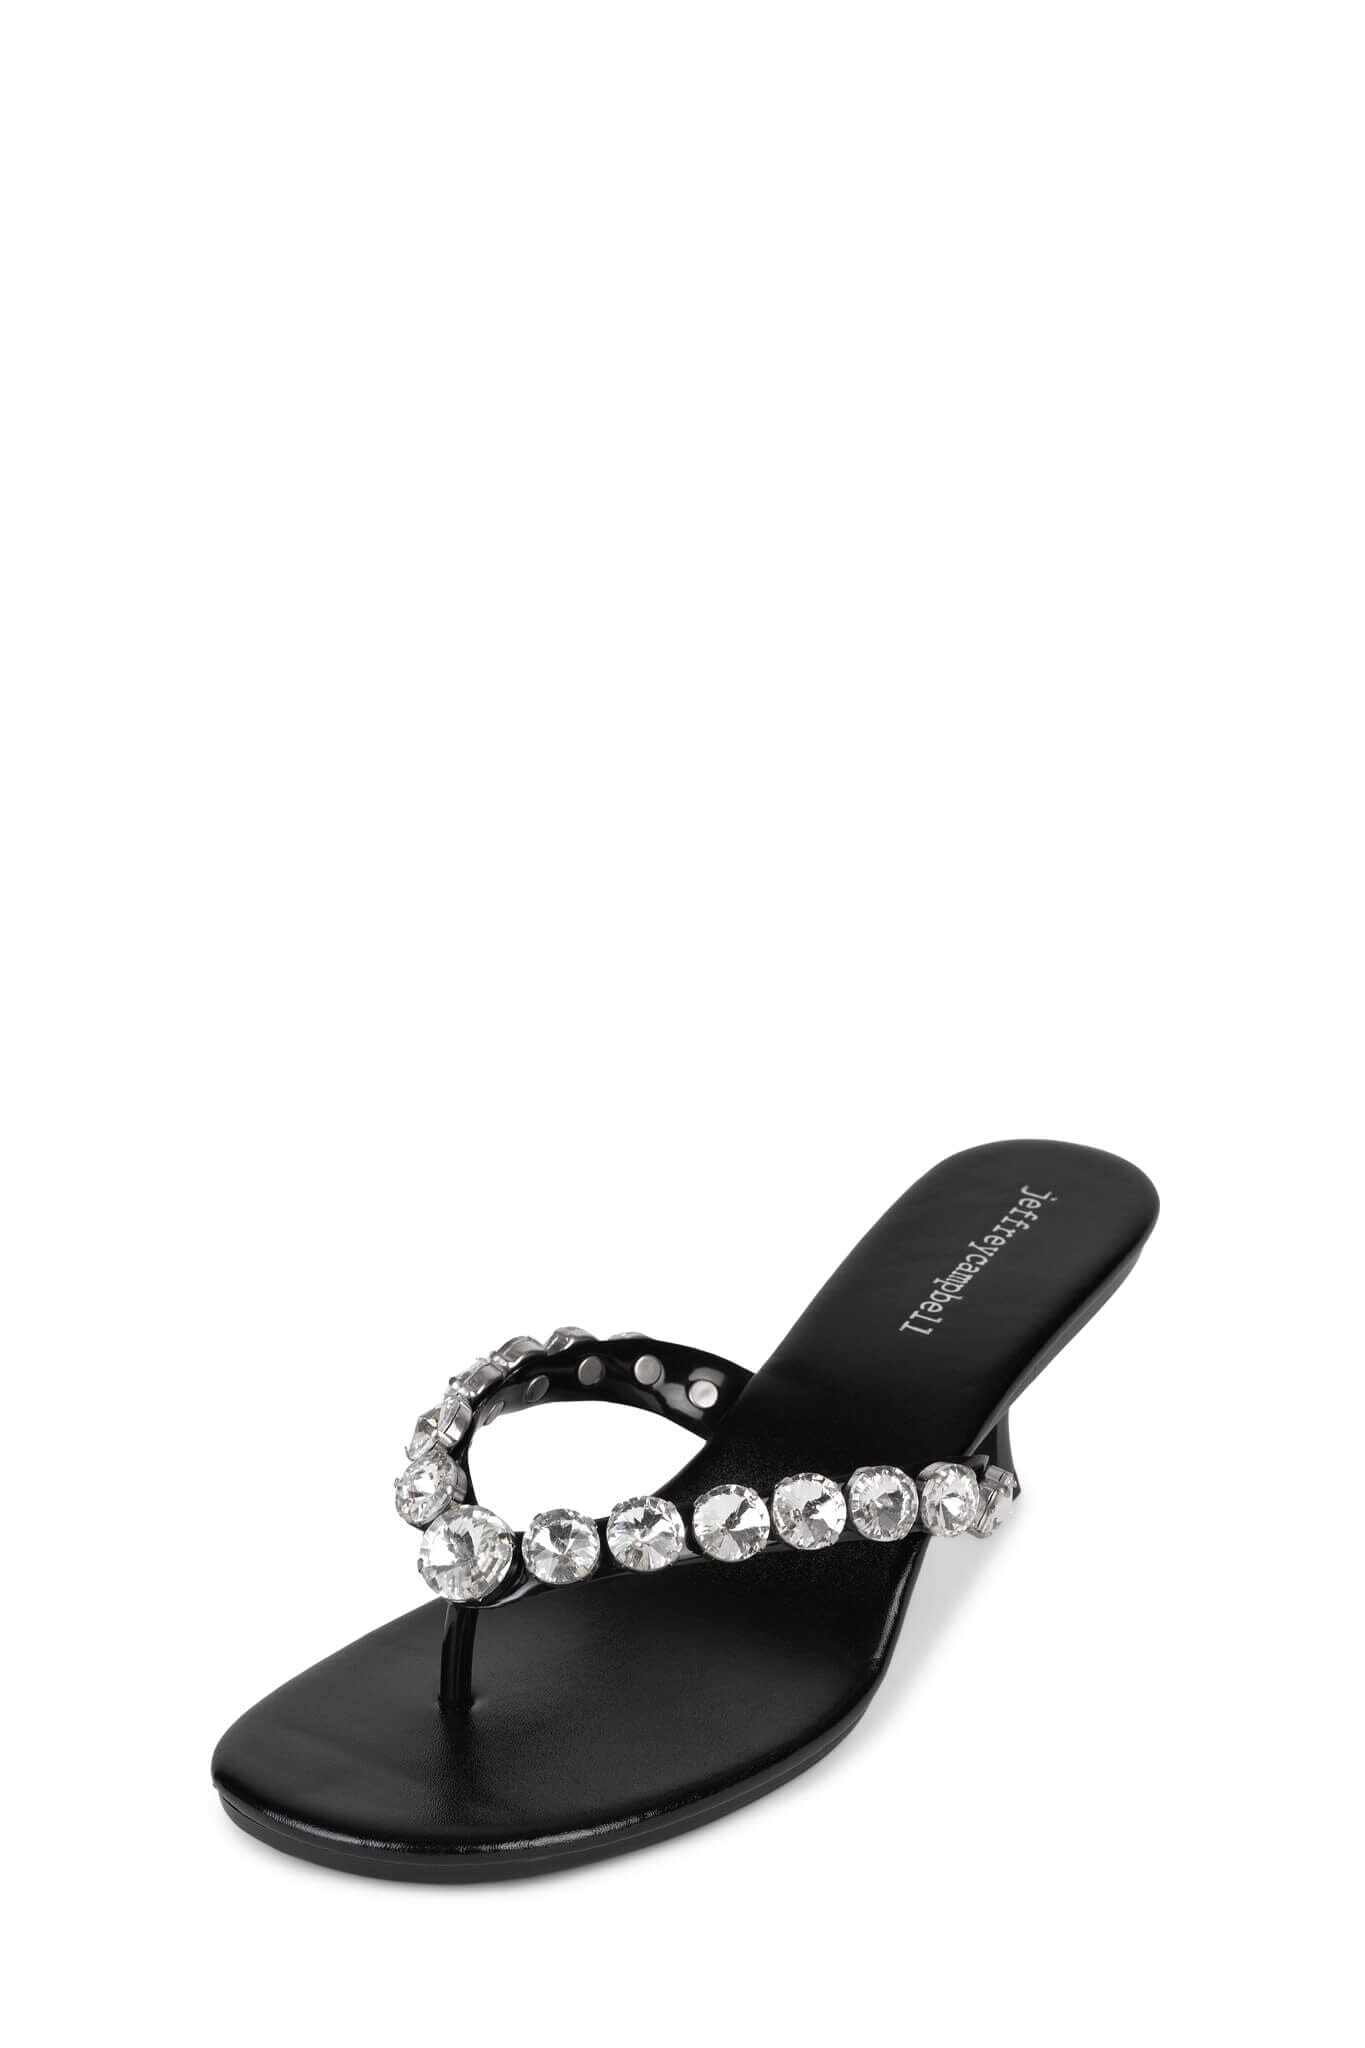 THONG-JWL Jeffrey Campbell Jelly Sandals